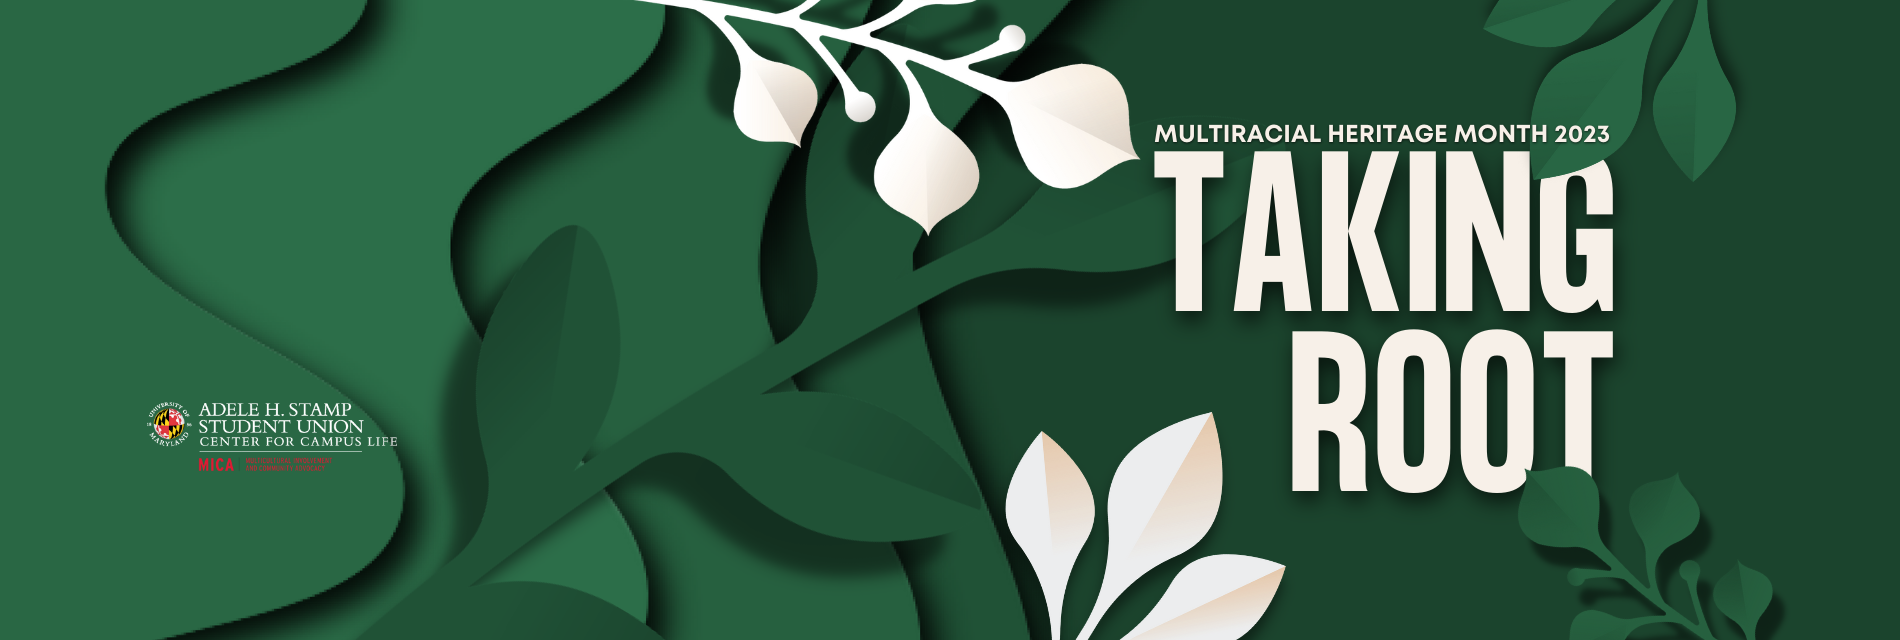 Green background with green and white stem leaves with the words in white text , multiracial heritage month 2023 taking root